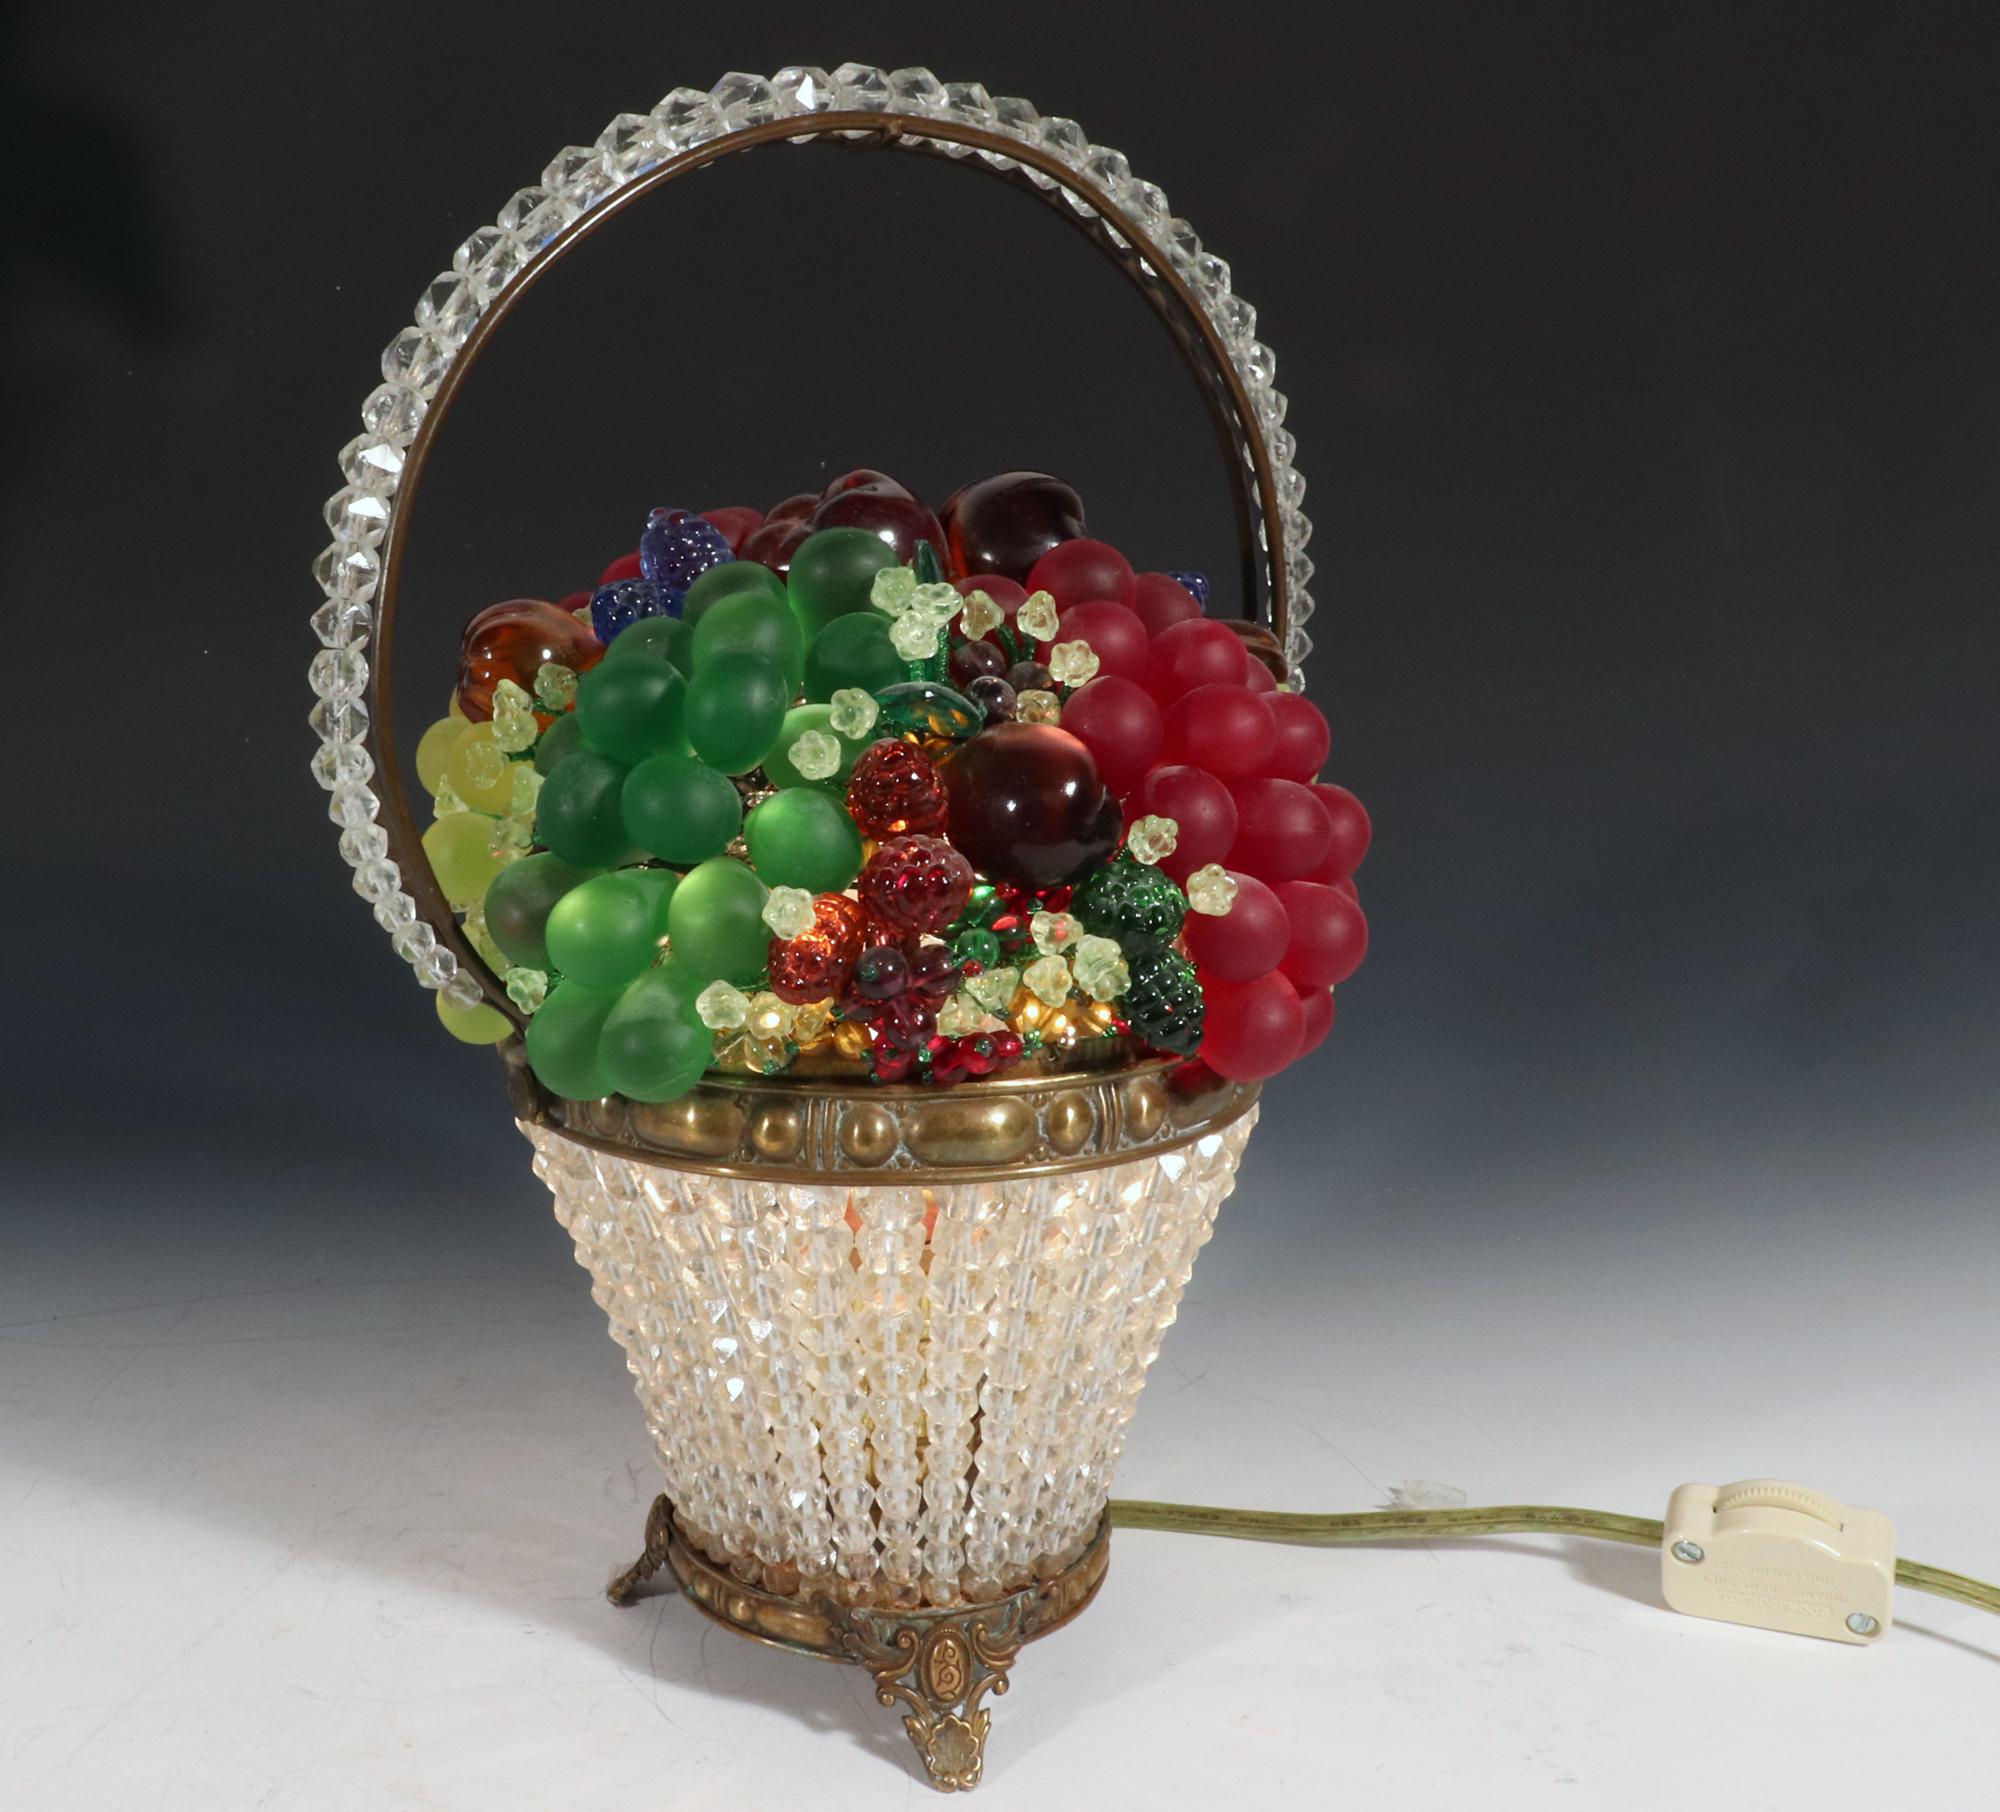 Super Cute & Fun

Czechoslovakian Glass Fruit Beaded Basket Lamp,
1920-1930s.

The glass basket with beaded base and handle has a removable top filled with glass fruit. The basket is electrified and is on working order producing a charming glow